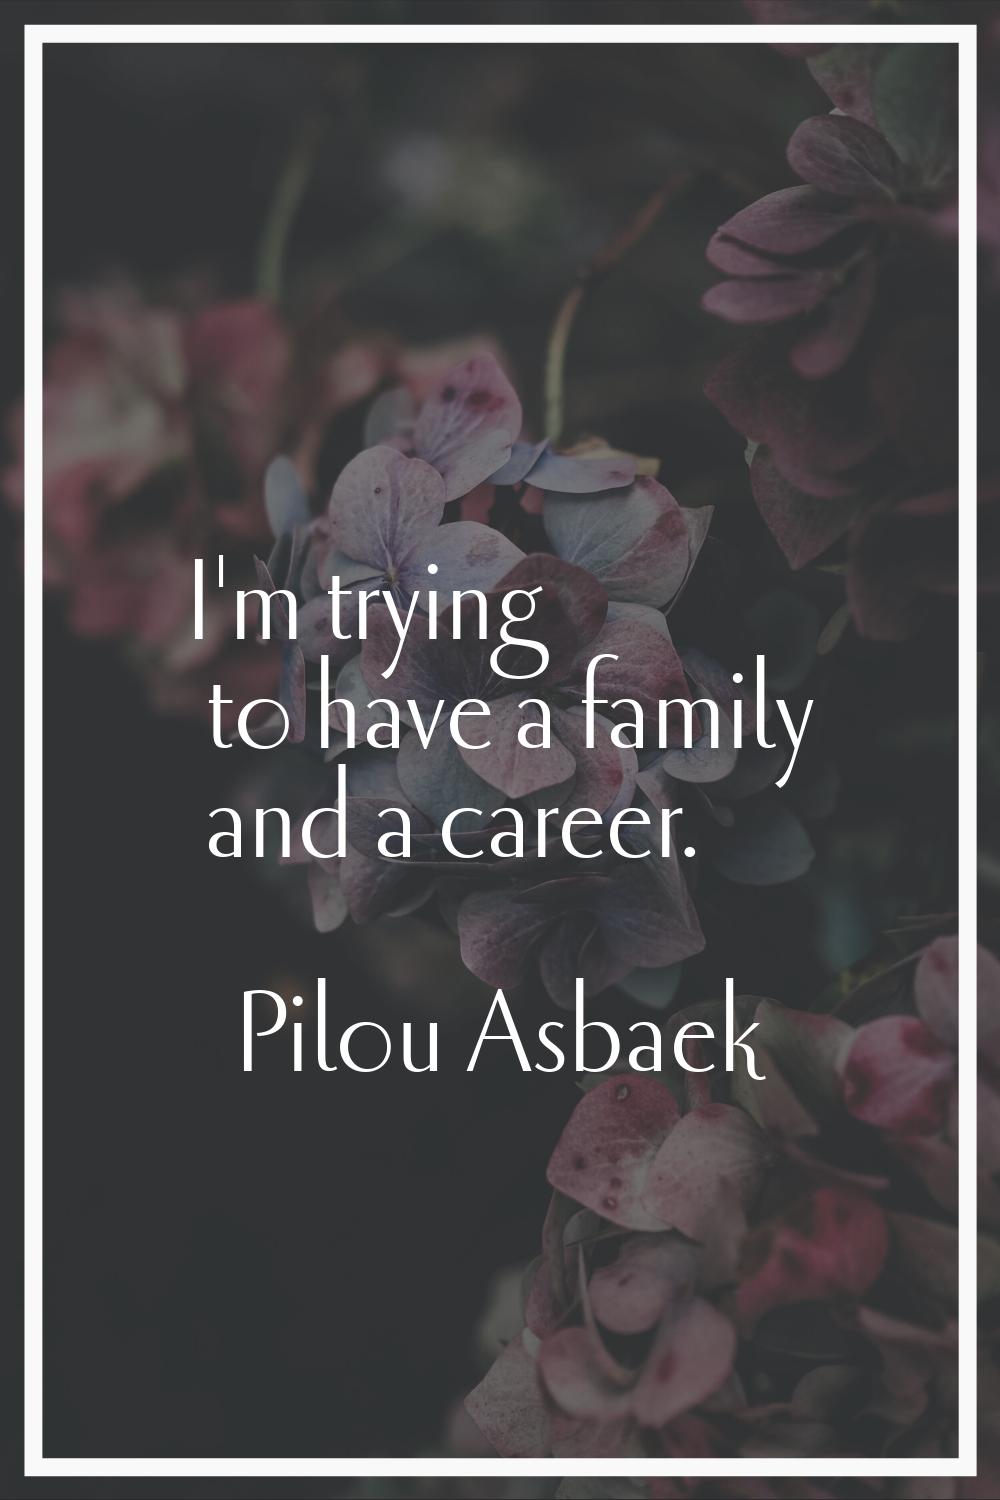 I'm trying to have a family and a career.